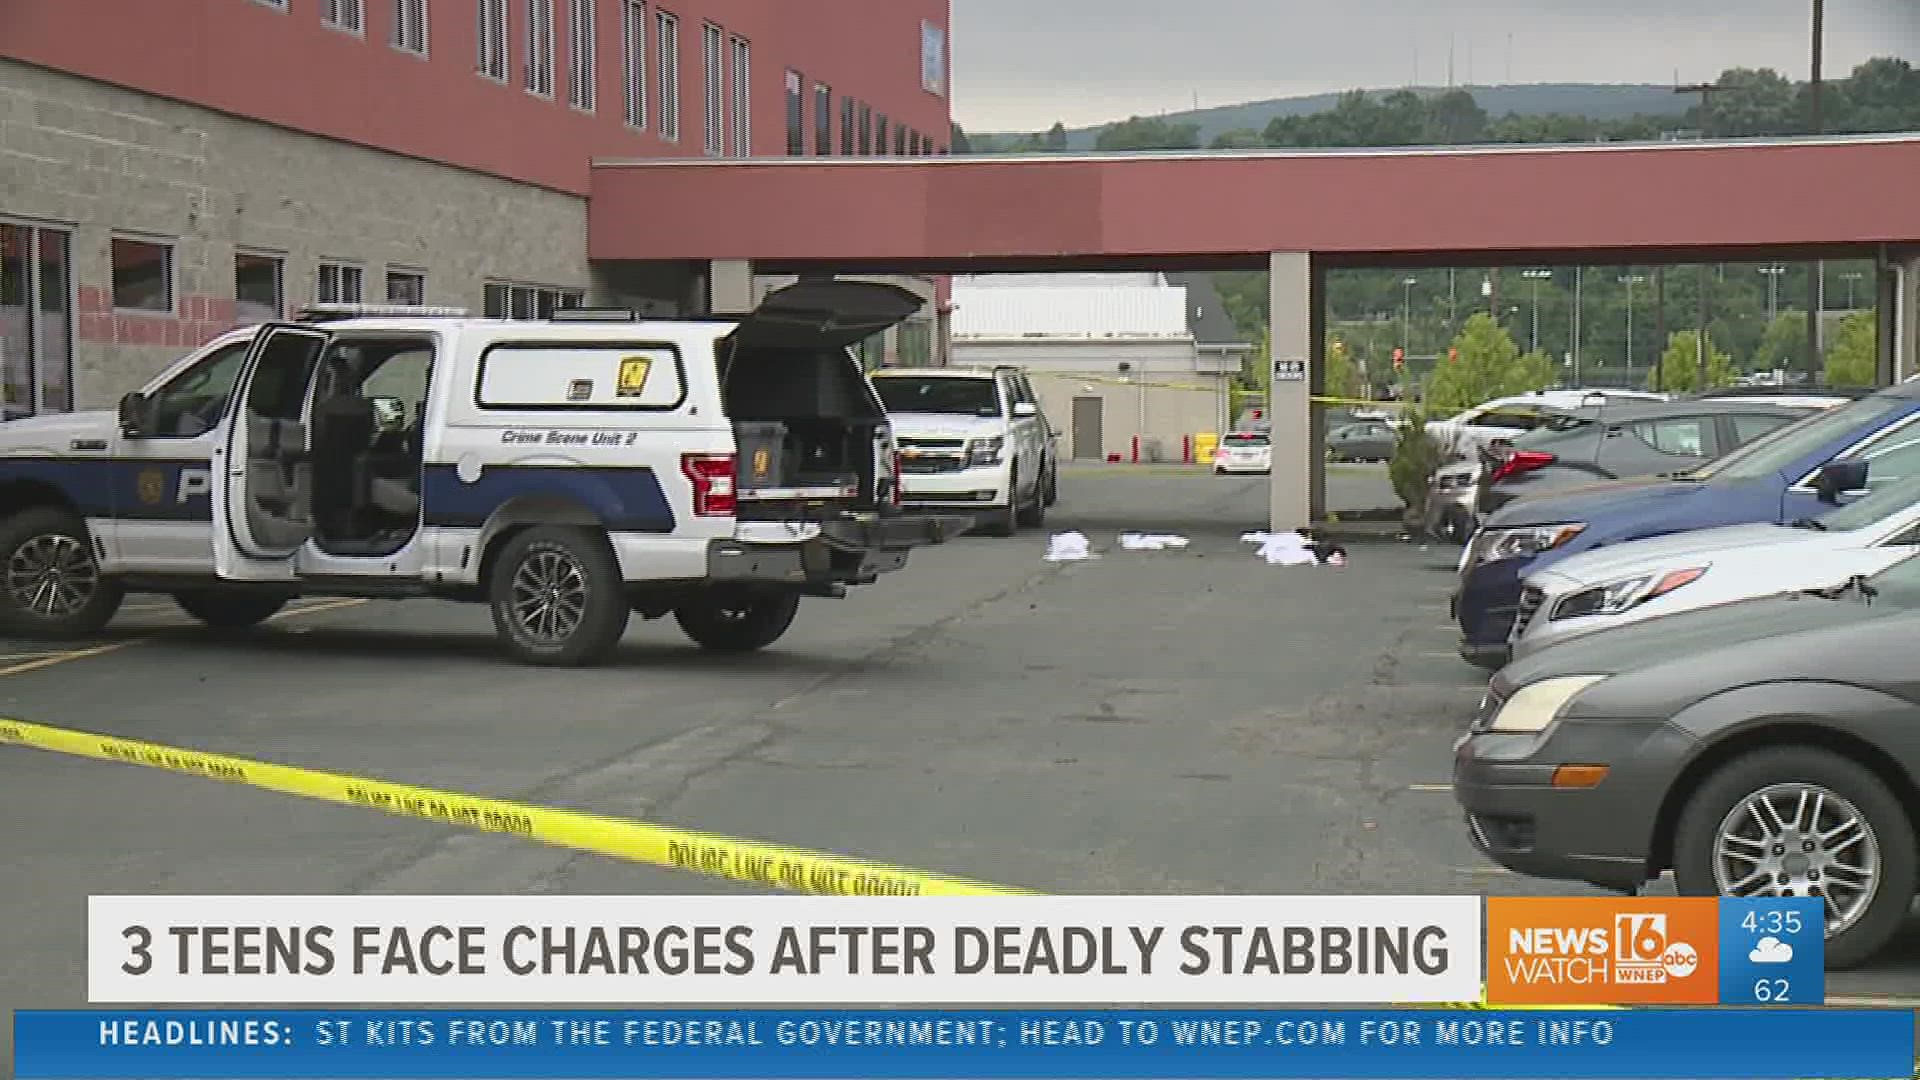 The Scranton School District plans enhanced security because that deadly stabbing happened not far from Scranton High School.